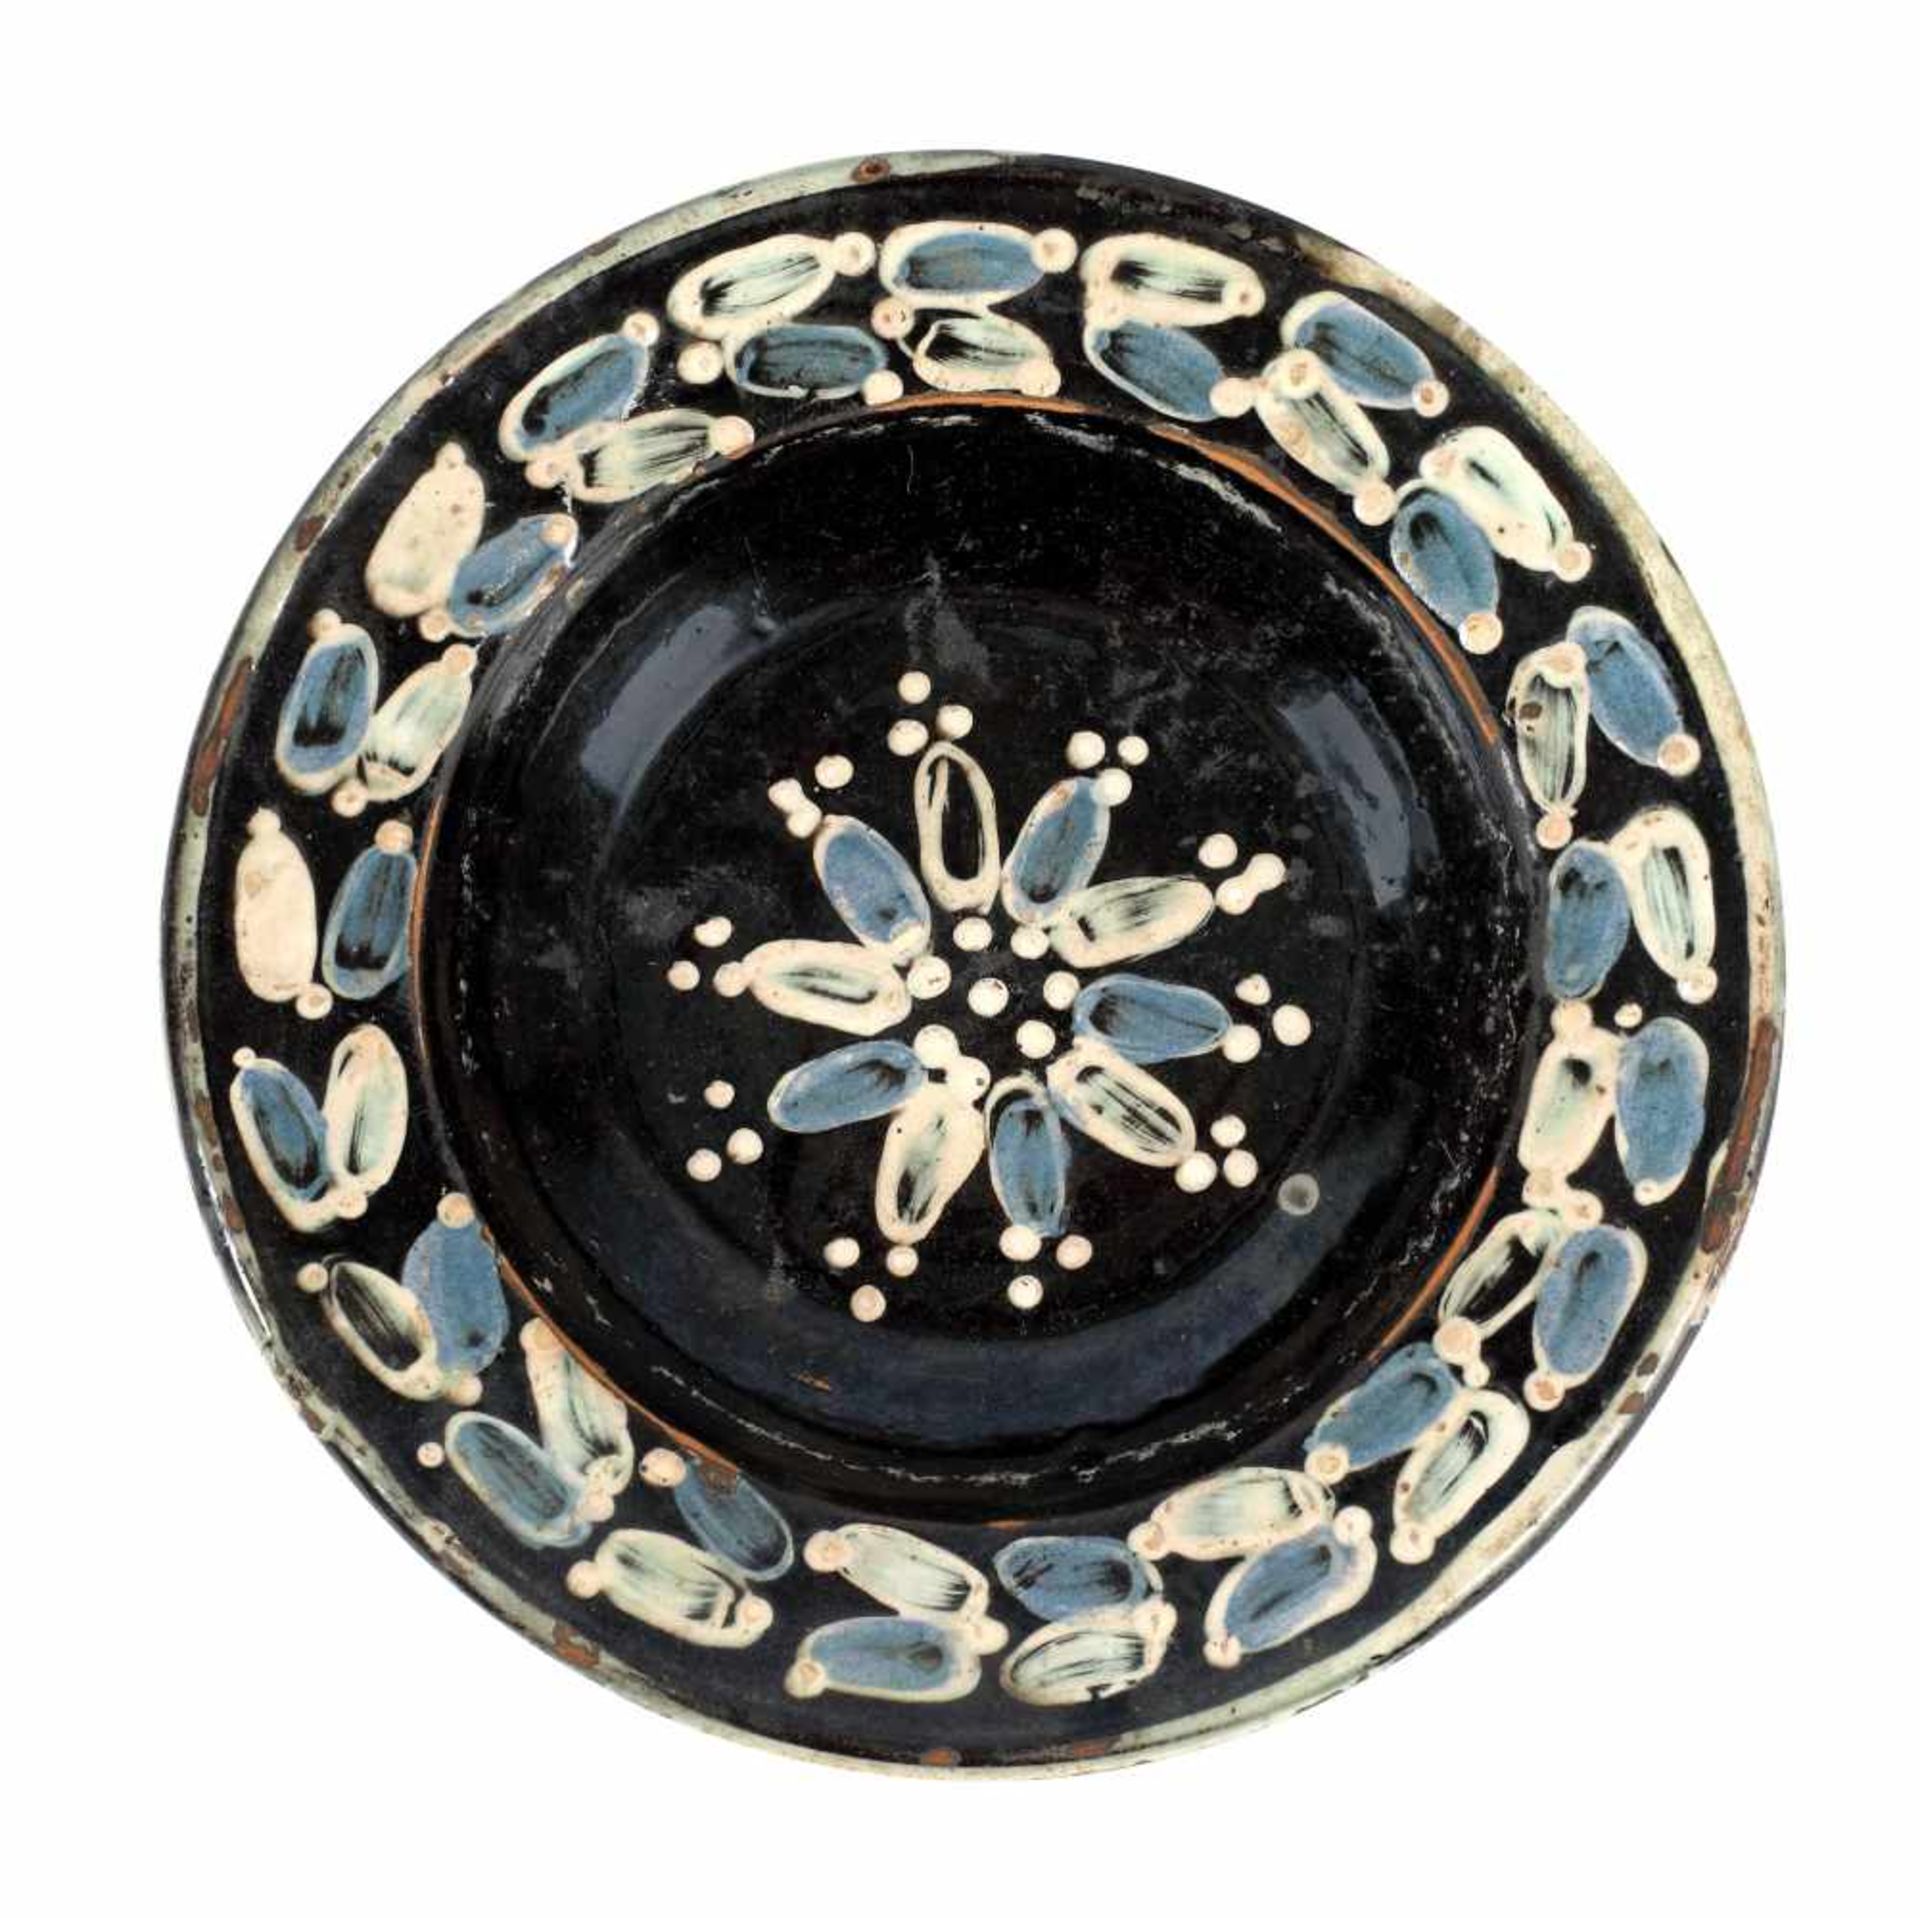 Plate, decorated with stylised floral motifs, Baia Mare, late 19th century